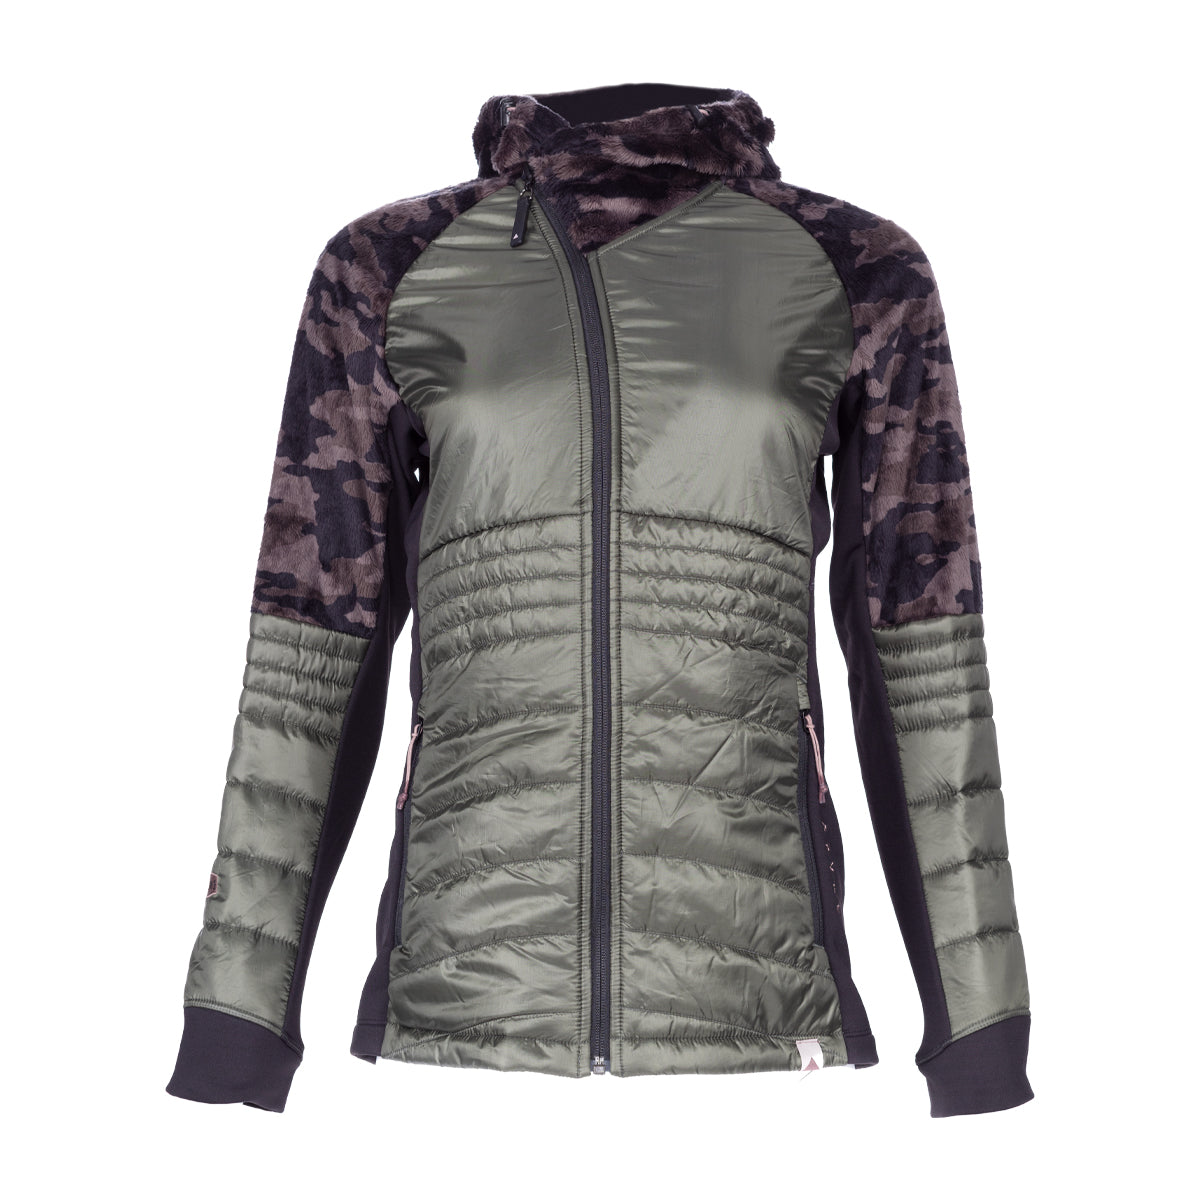 Azyre Believe Hybrid Insulated Hoodie in  by GOHUNT | Azyre - GOHUNT Shop